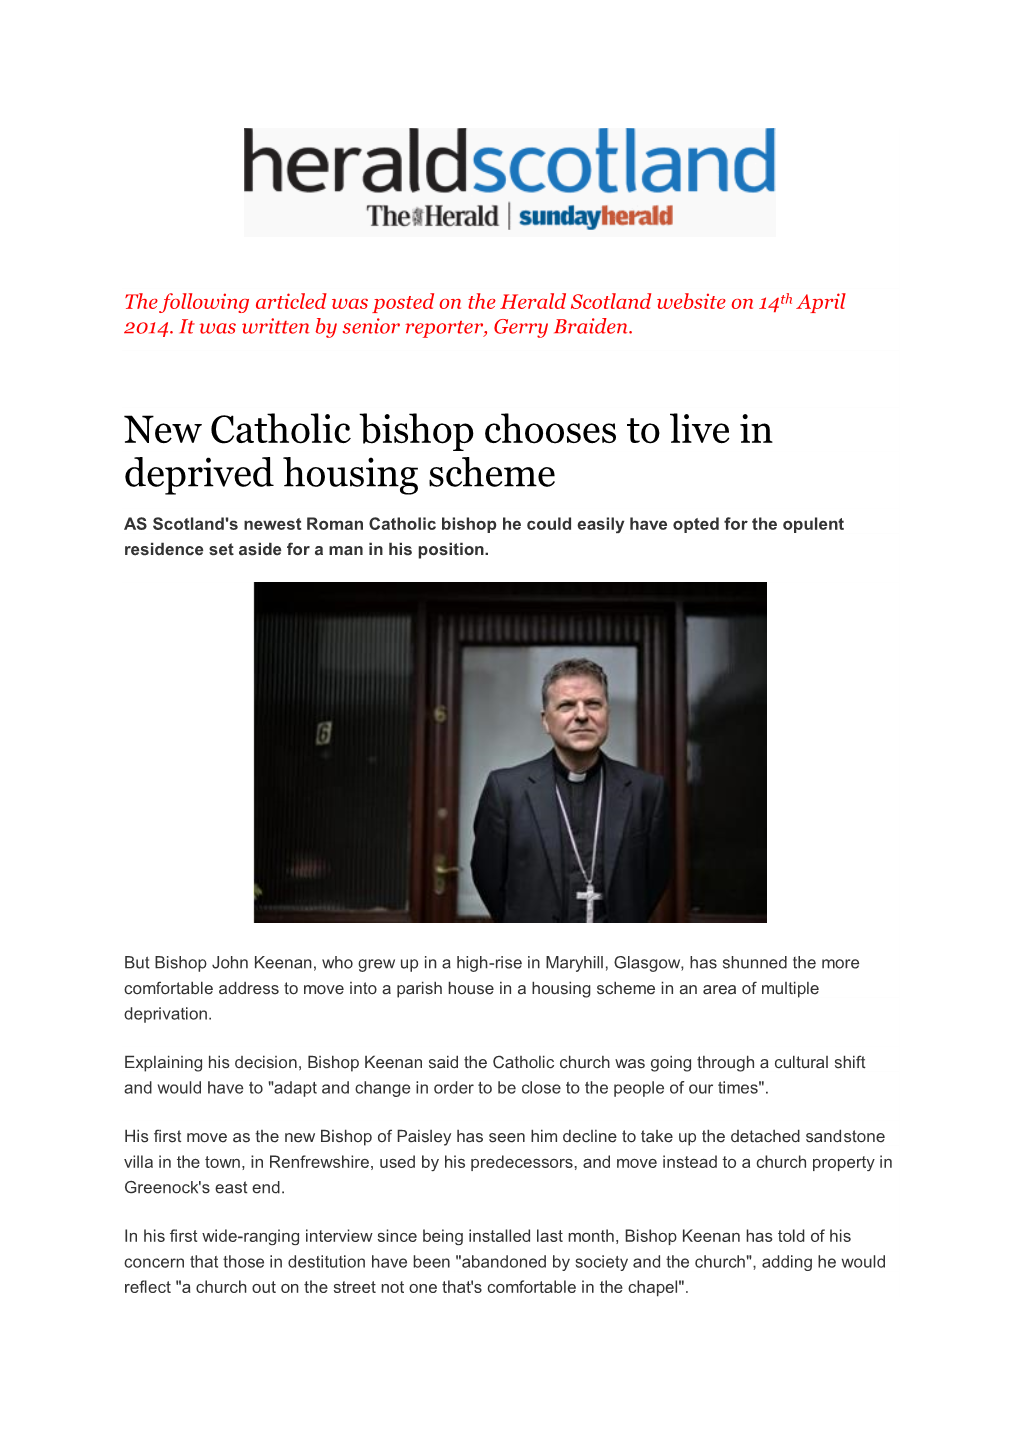 New Catholic Bishop Chooses to Live in Deprived Housing Scheme